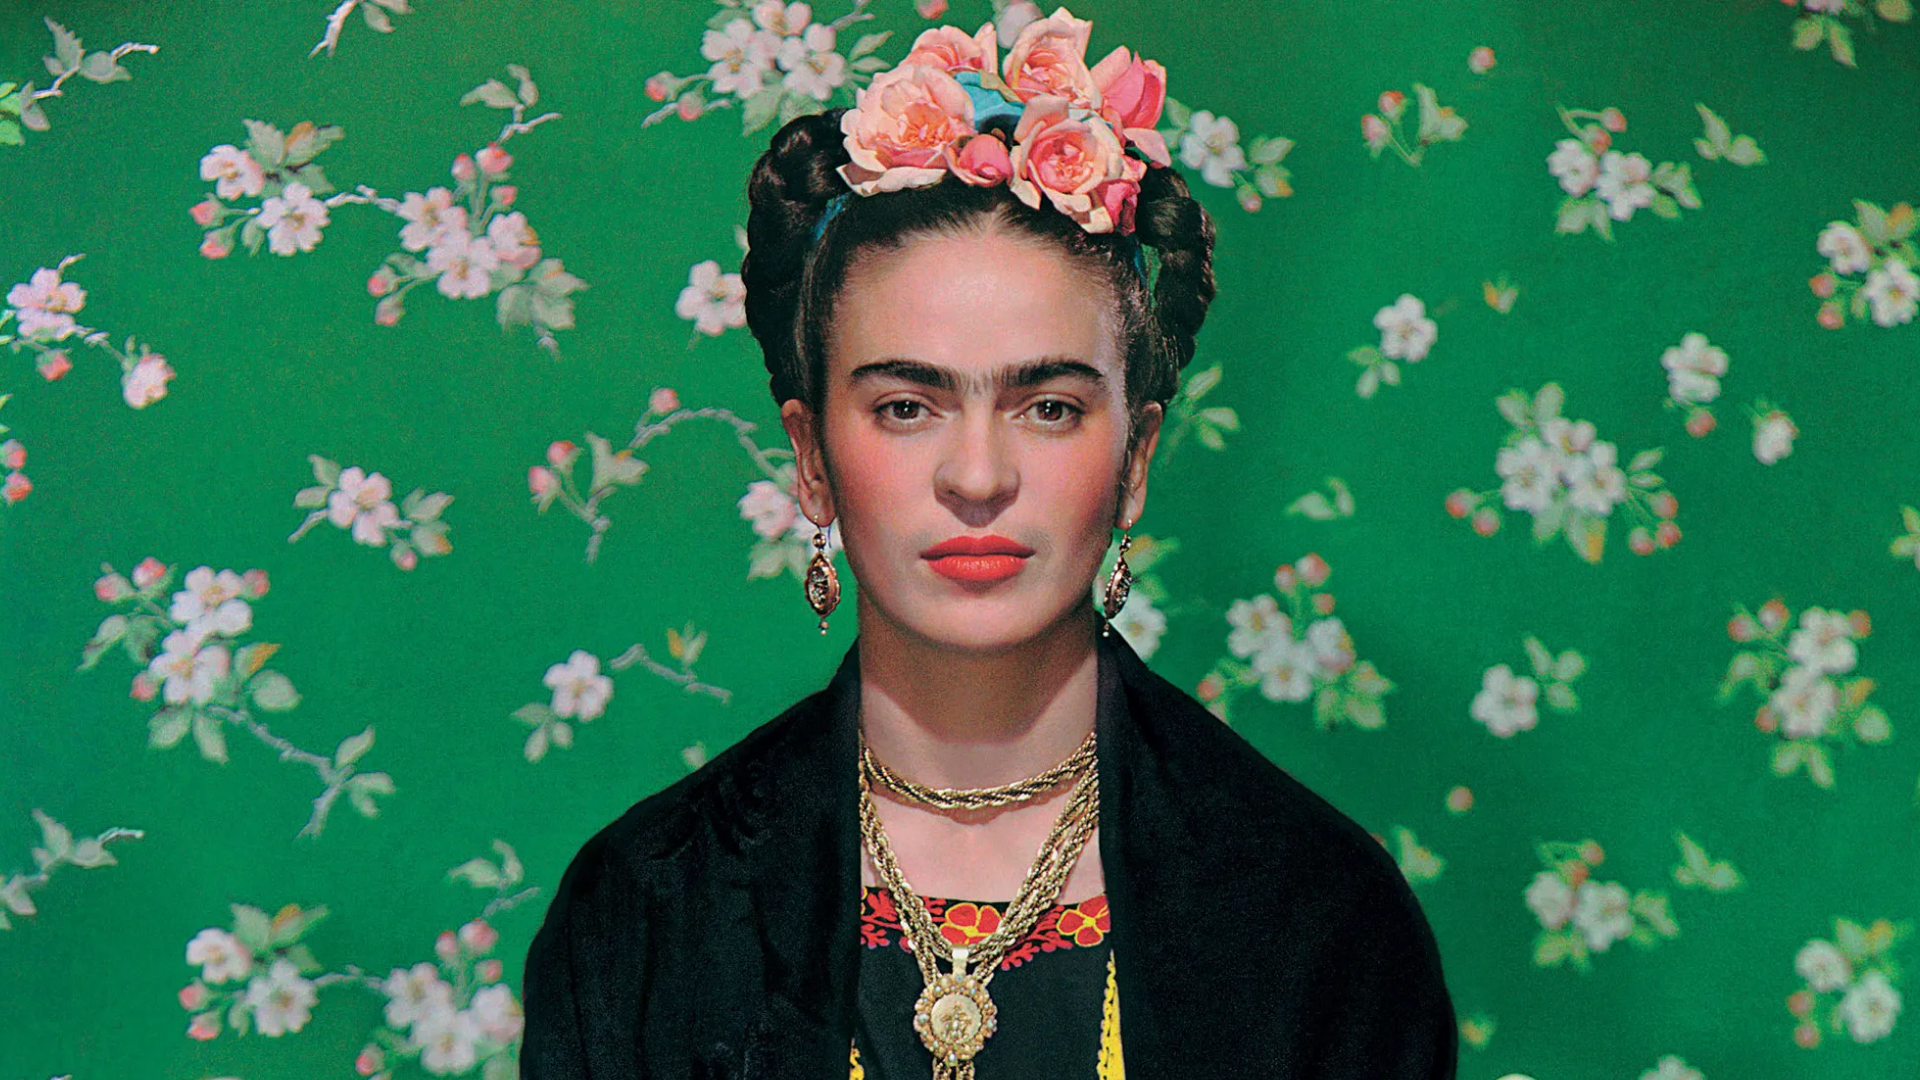 Frida Kahlo wearing luscious red lipstick, flowers in her hair, gold necklaces and long earrings, against a floral green background.